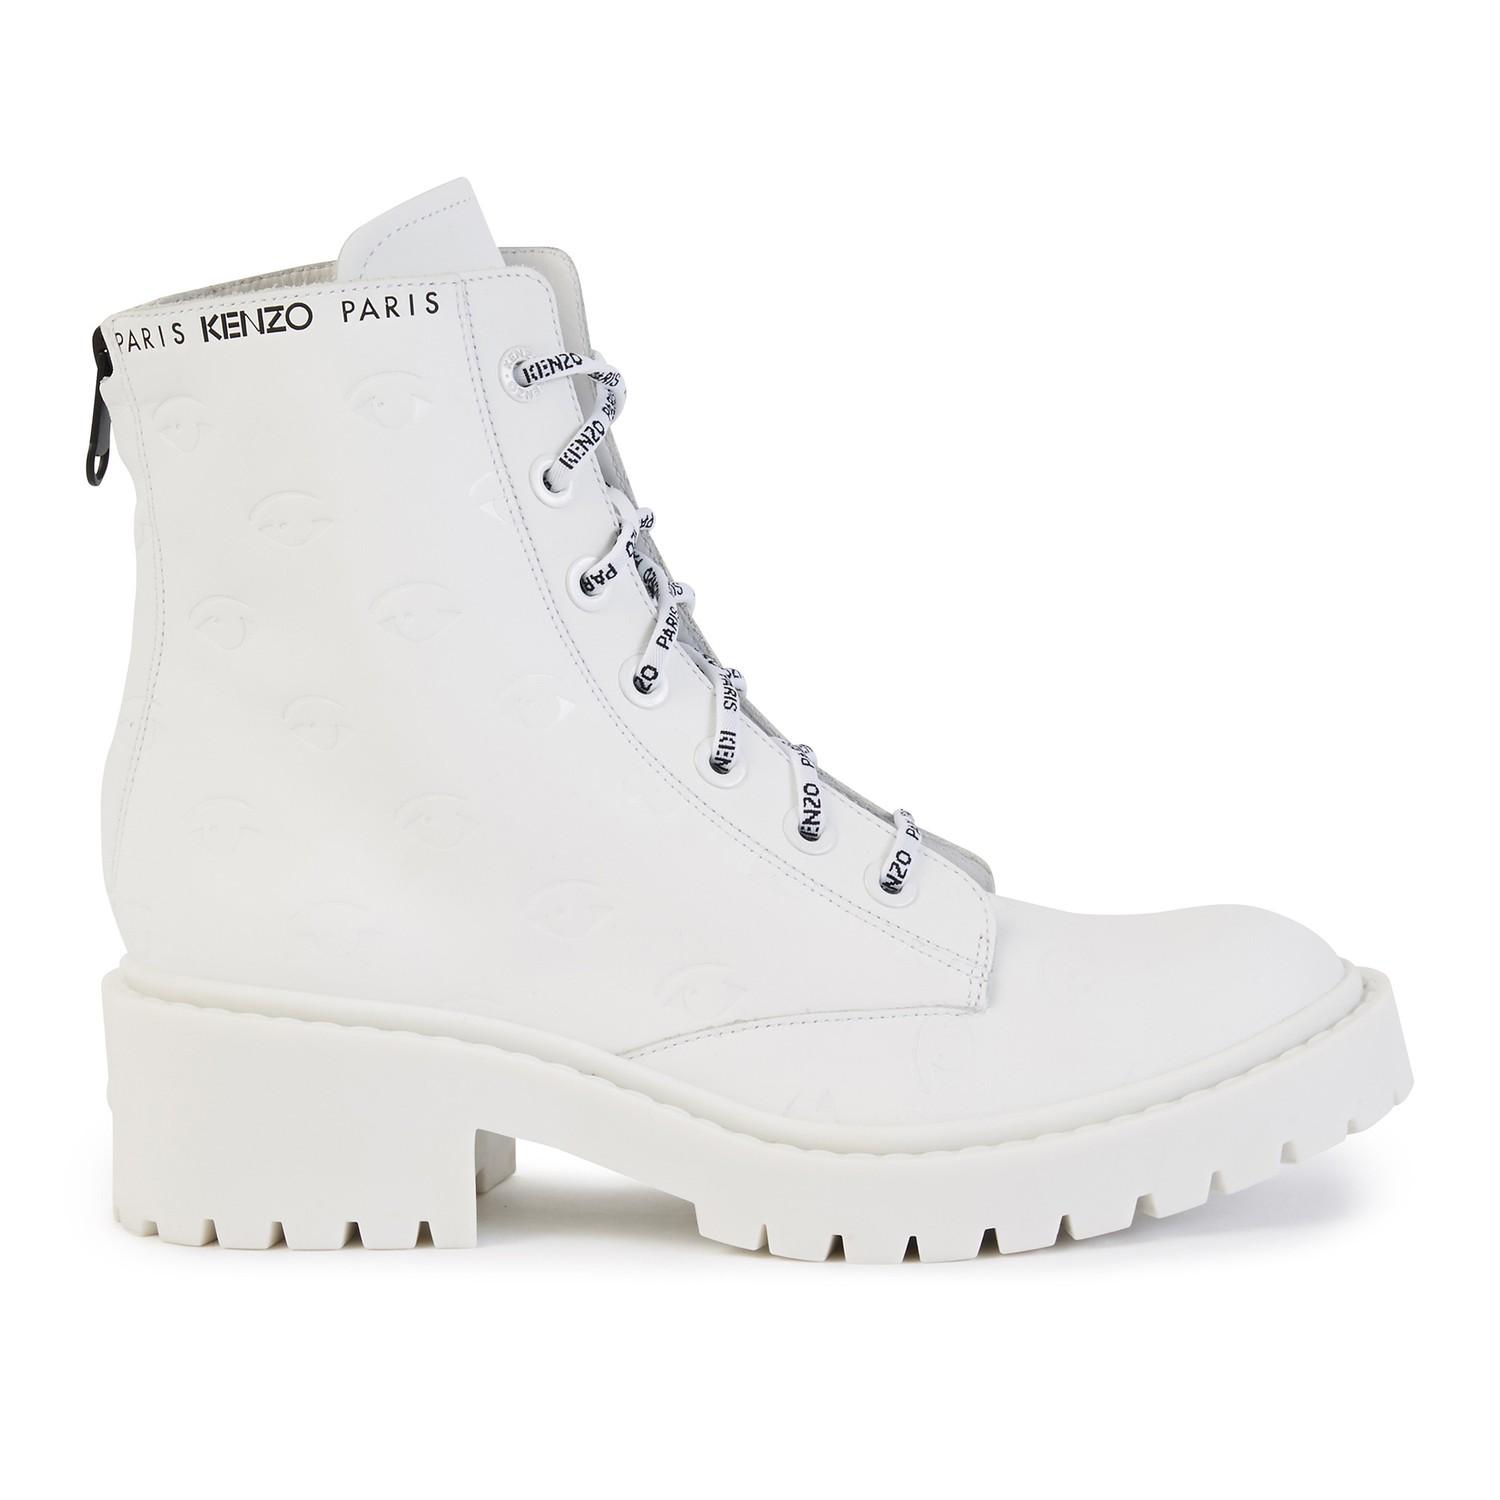 KENZO Pike Lace-up Boots in White - Lyst